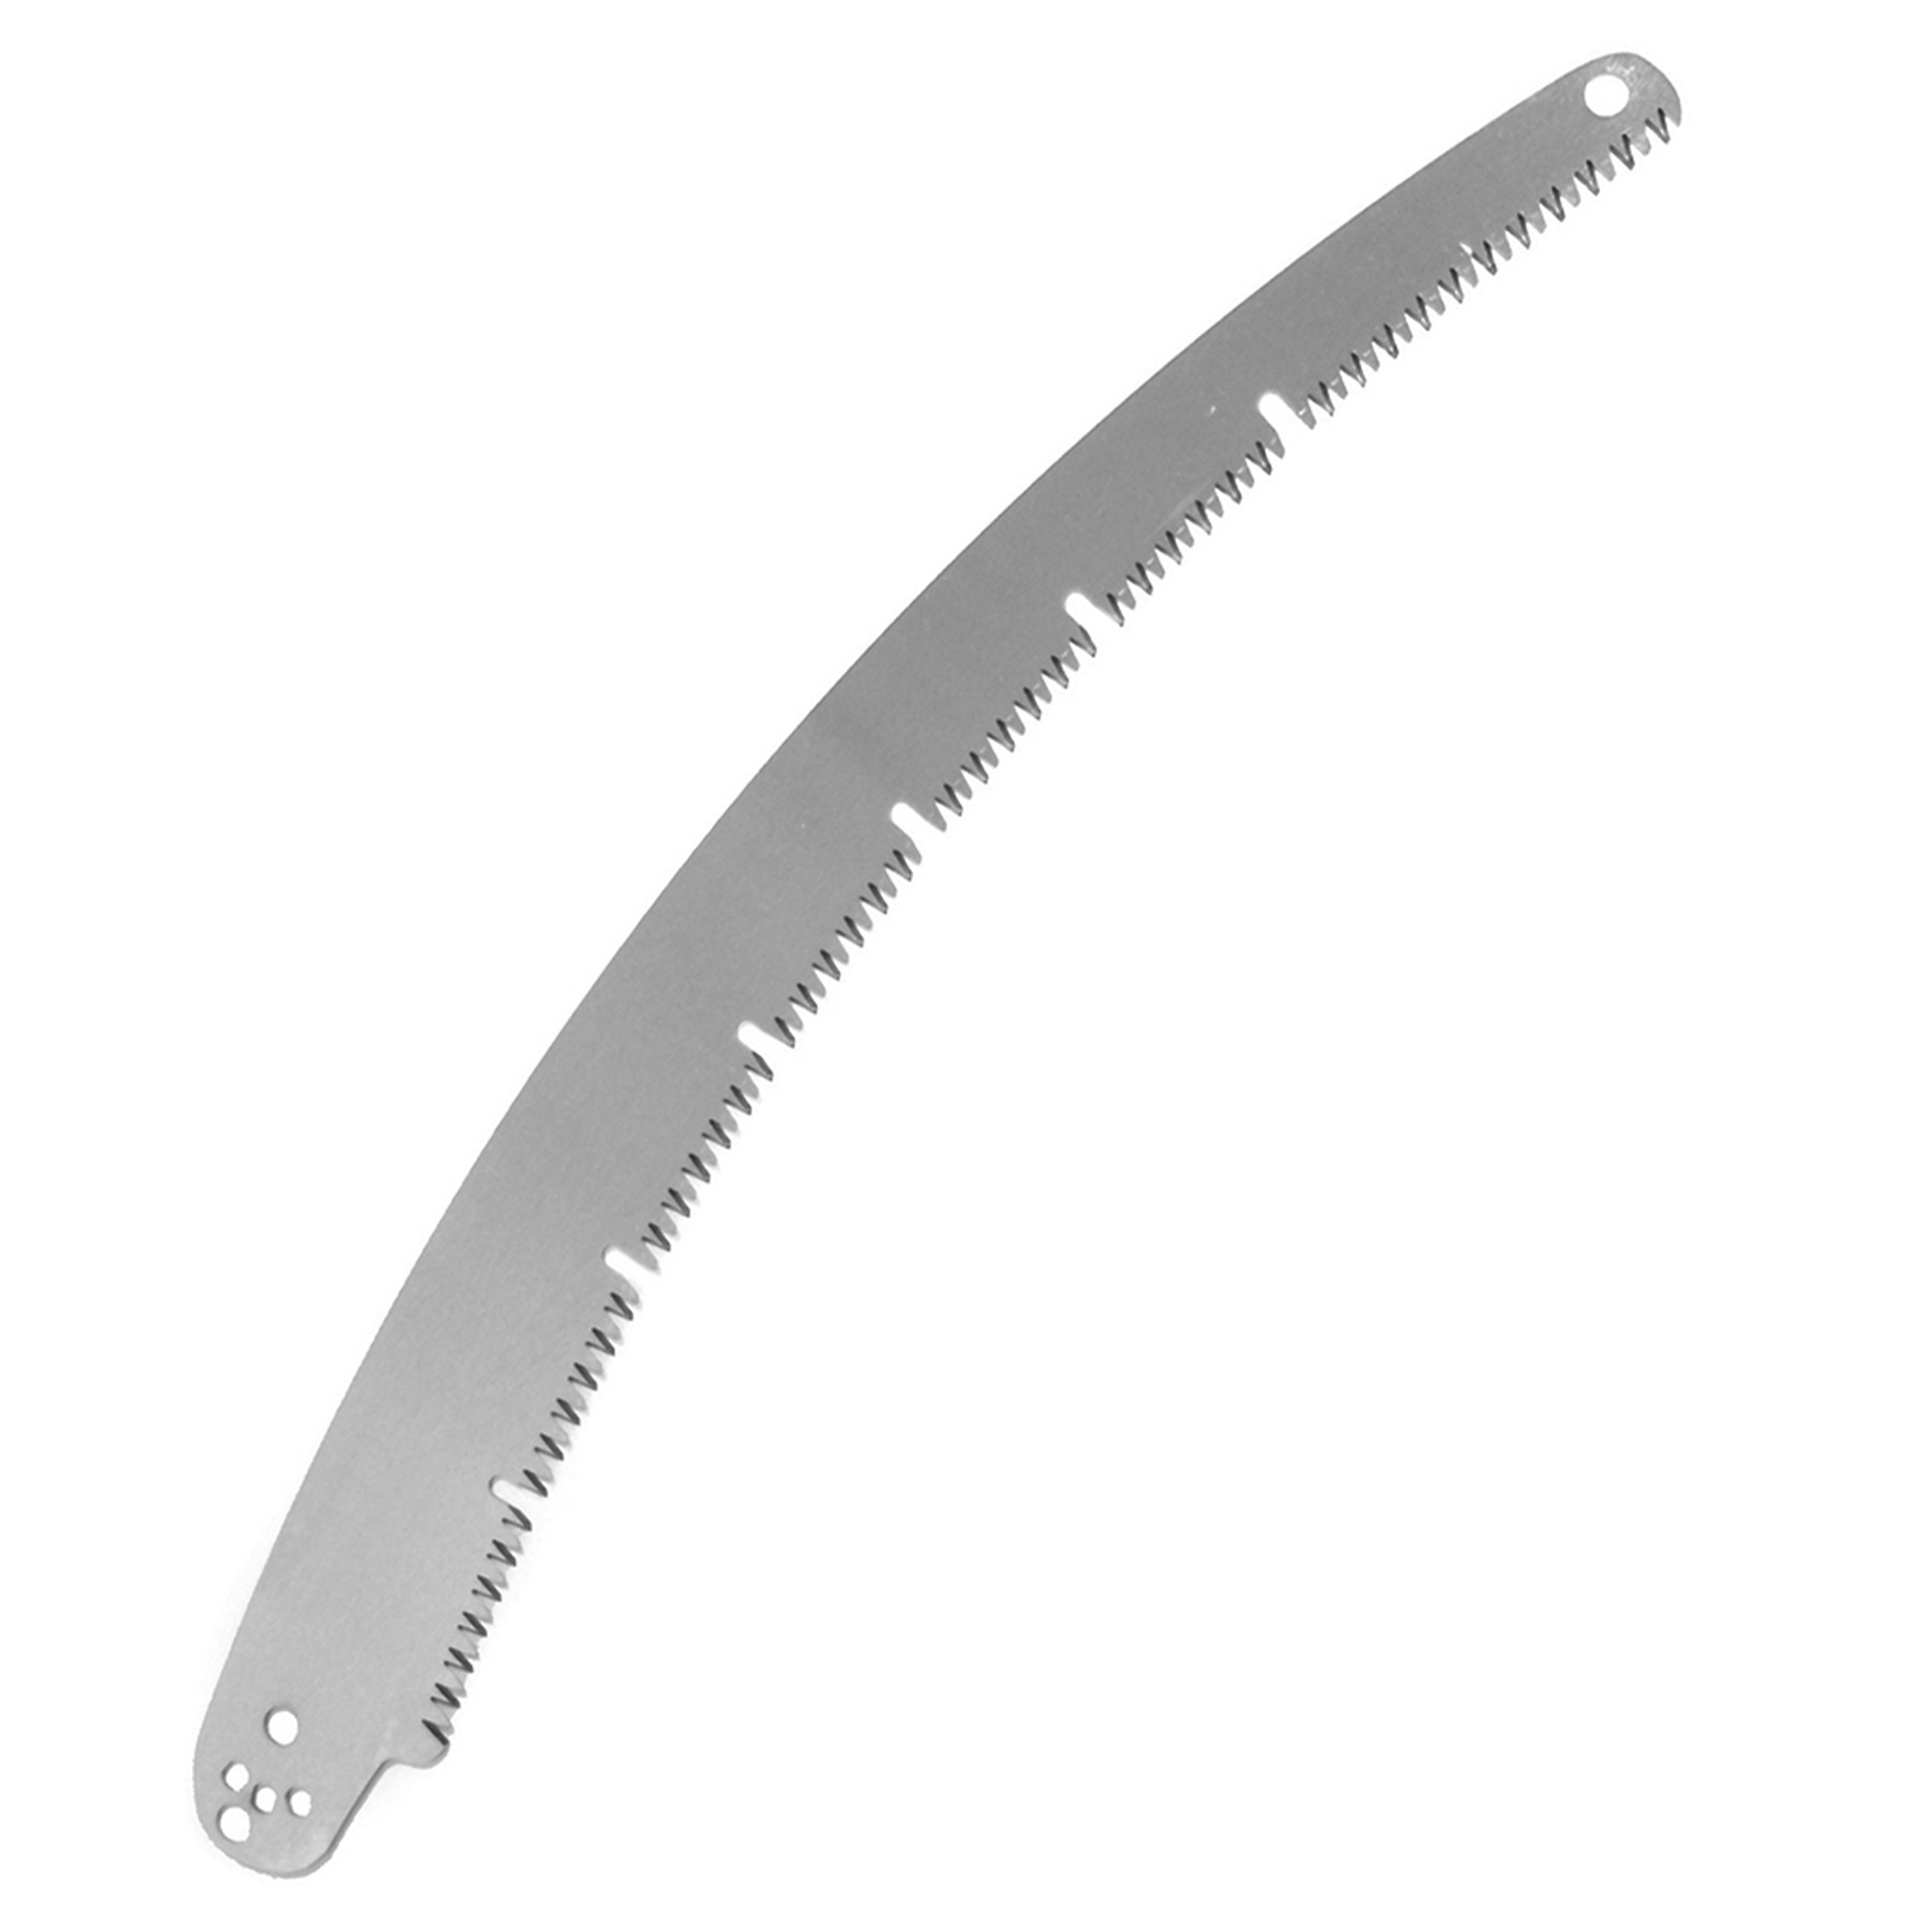 Jameson Barracuda 16 in Tri-Cut Replacement Pruning Saw Blade For Pole Saw Head 